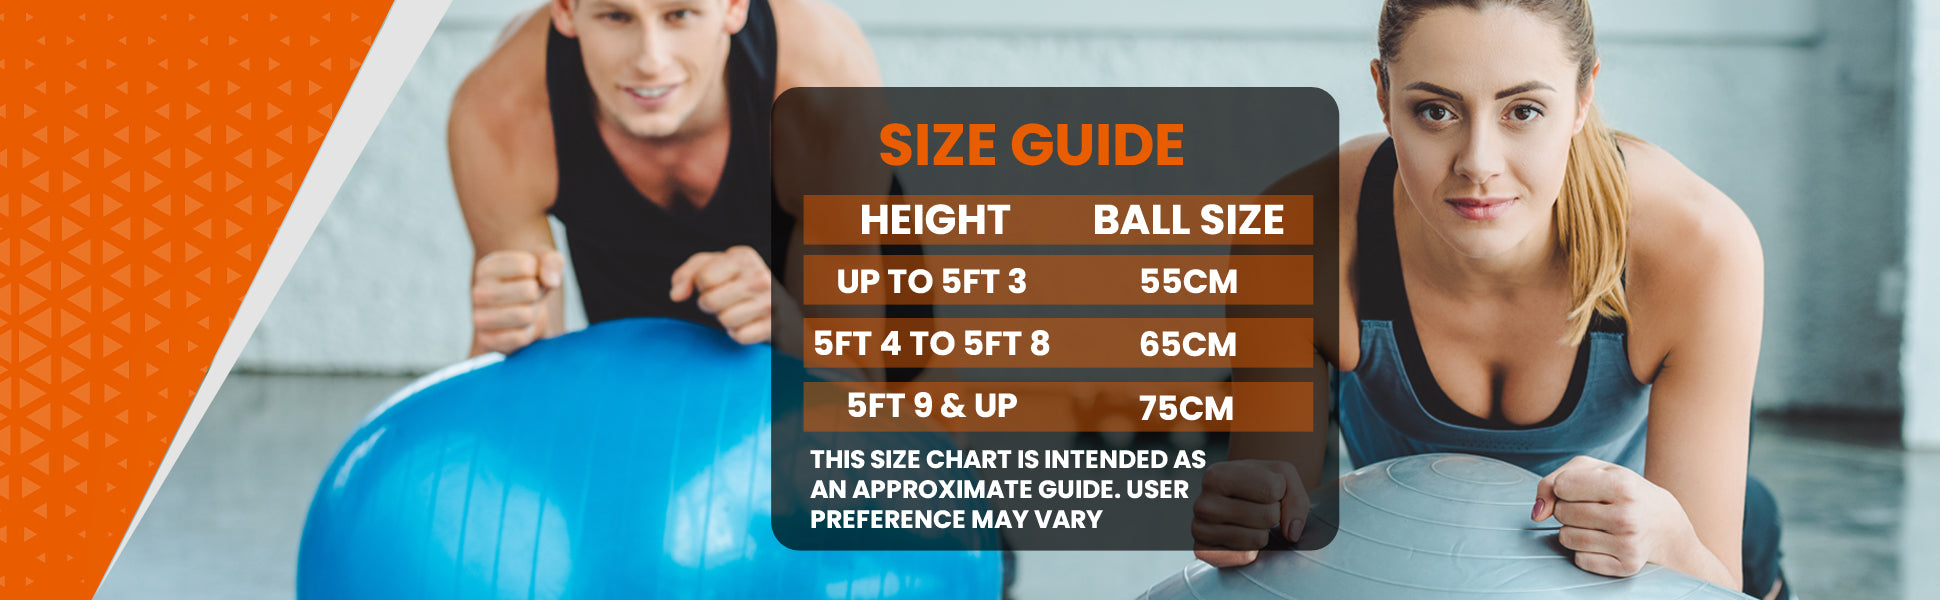 Fortitude Sports Exercise Balls & Accessories Size Guide